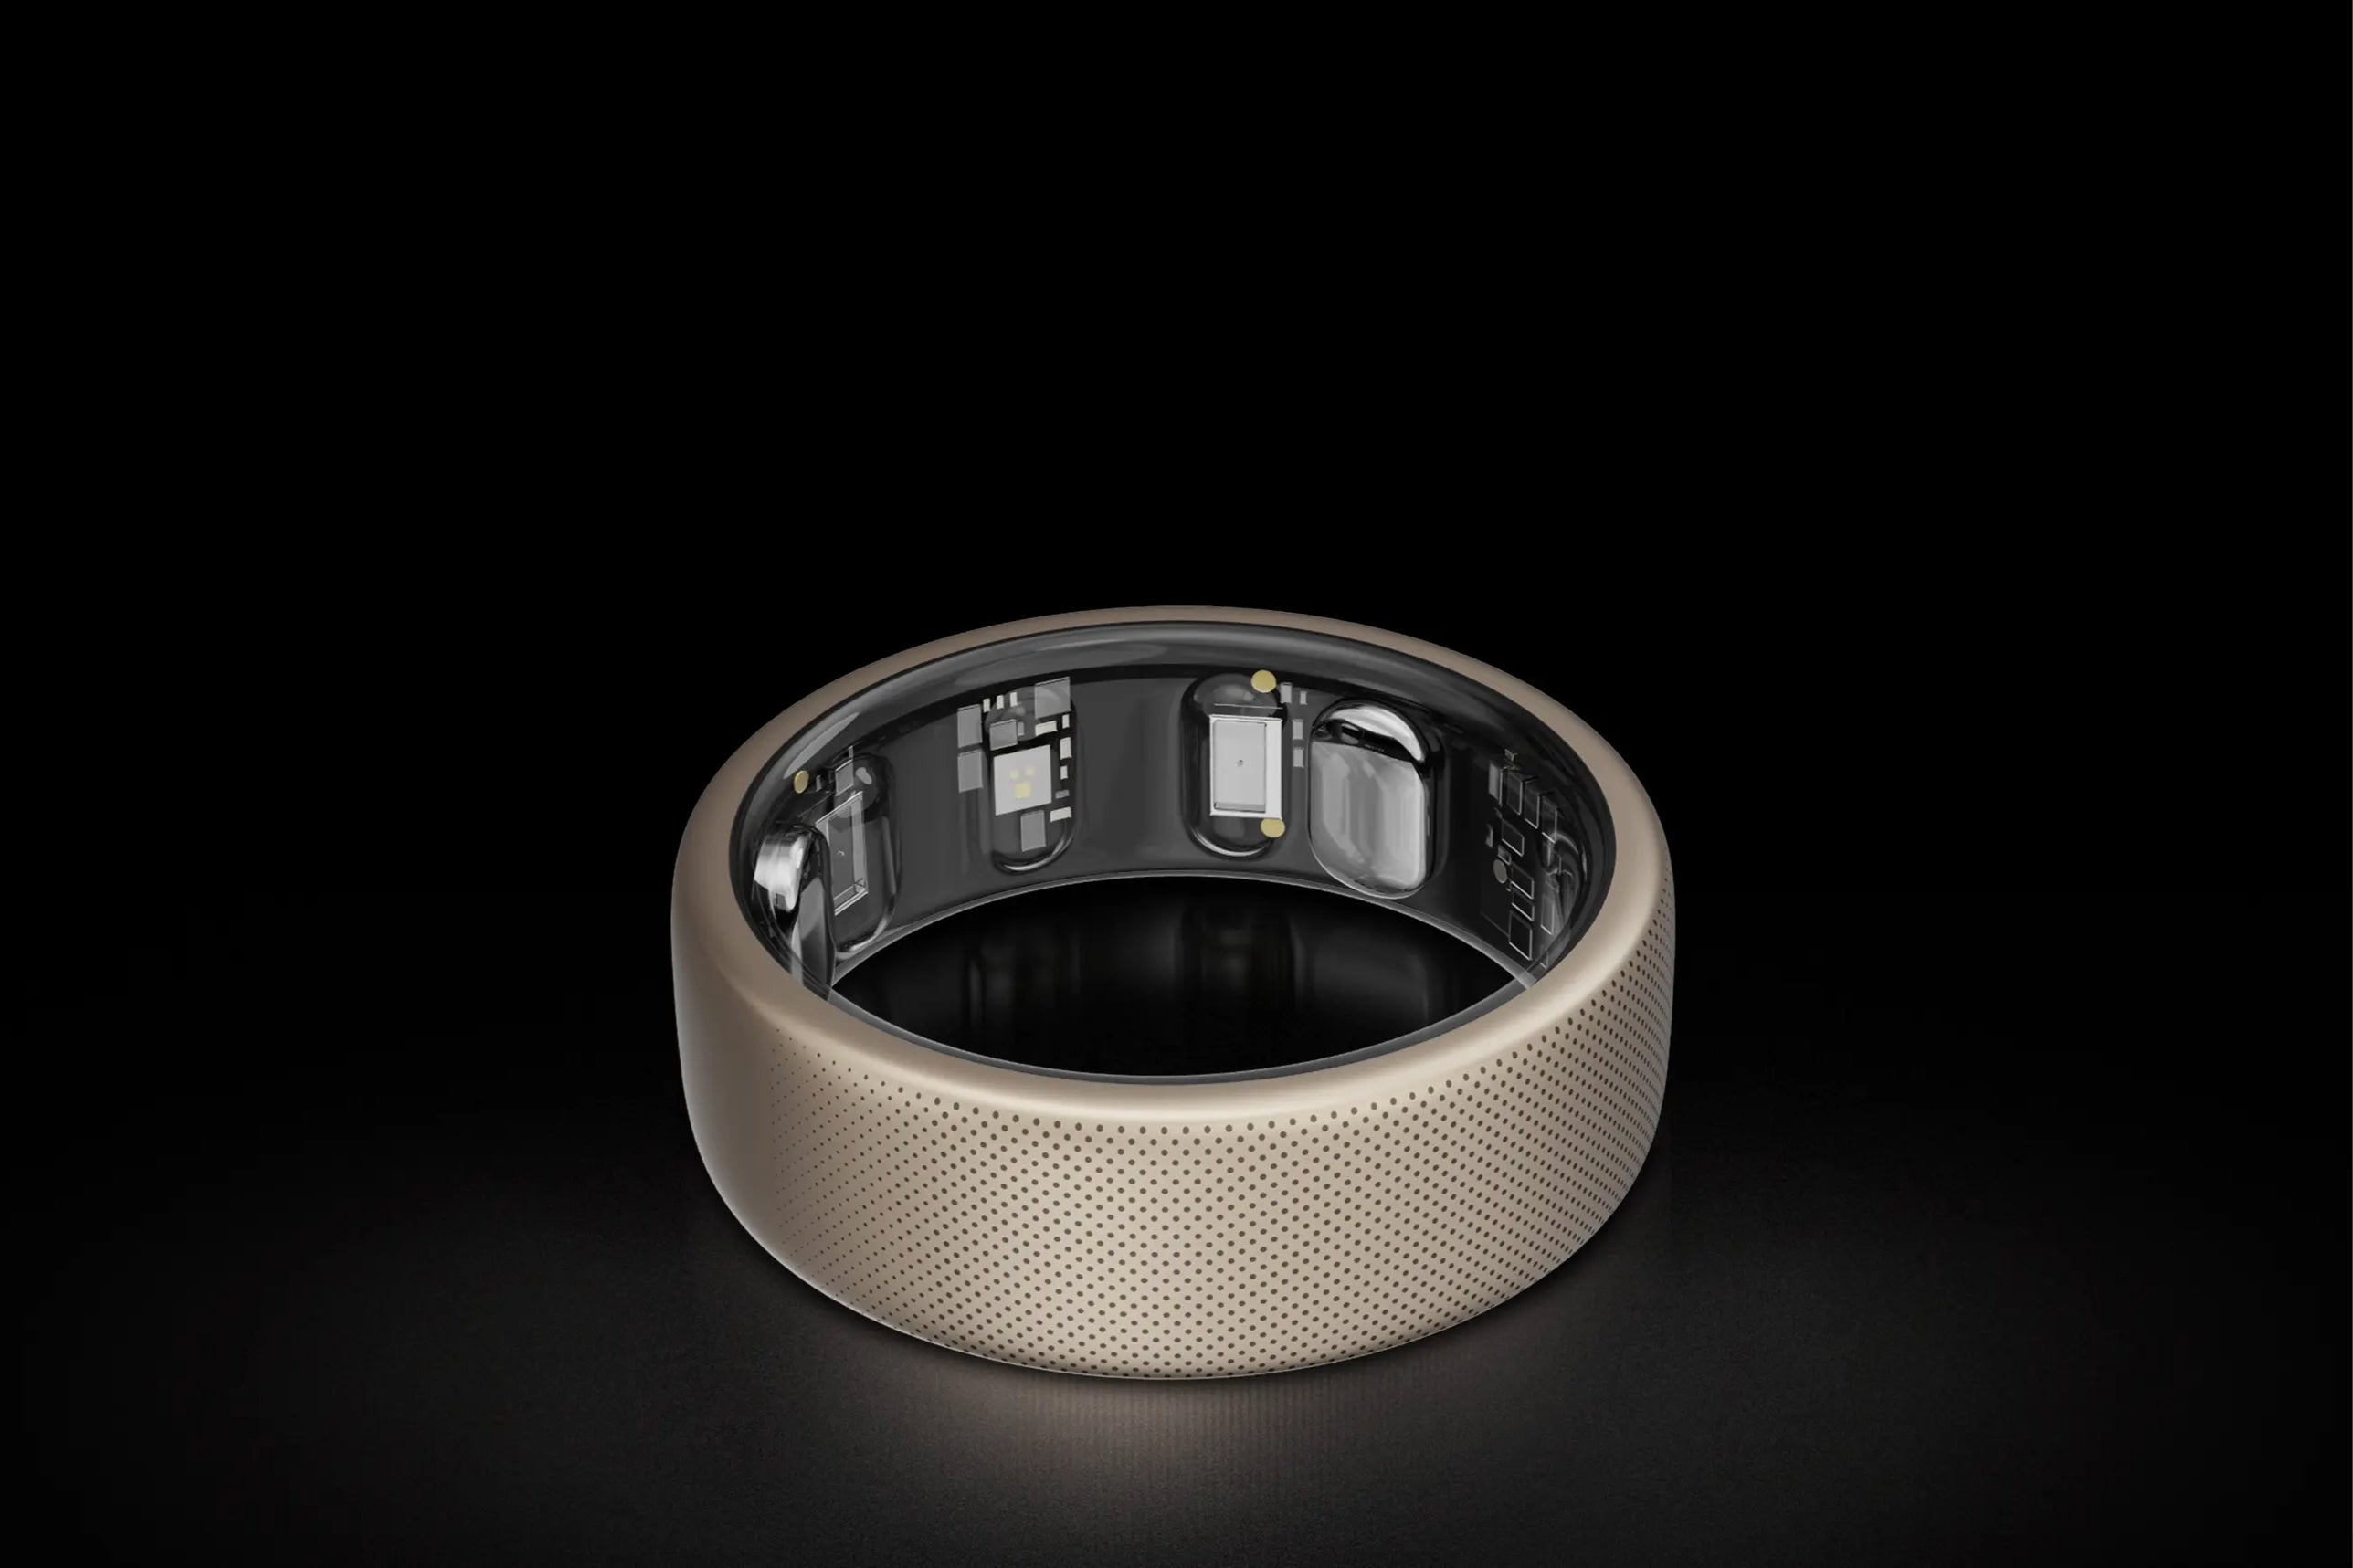 Image Credit–Amazfit - Amazfit enters the smart ring arena with its own Helio Ring